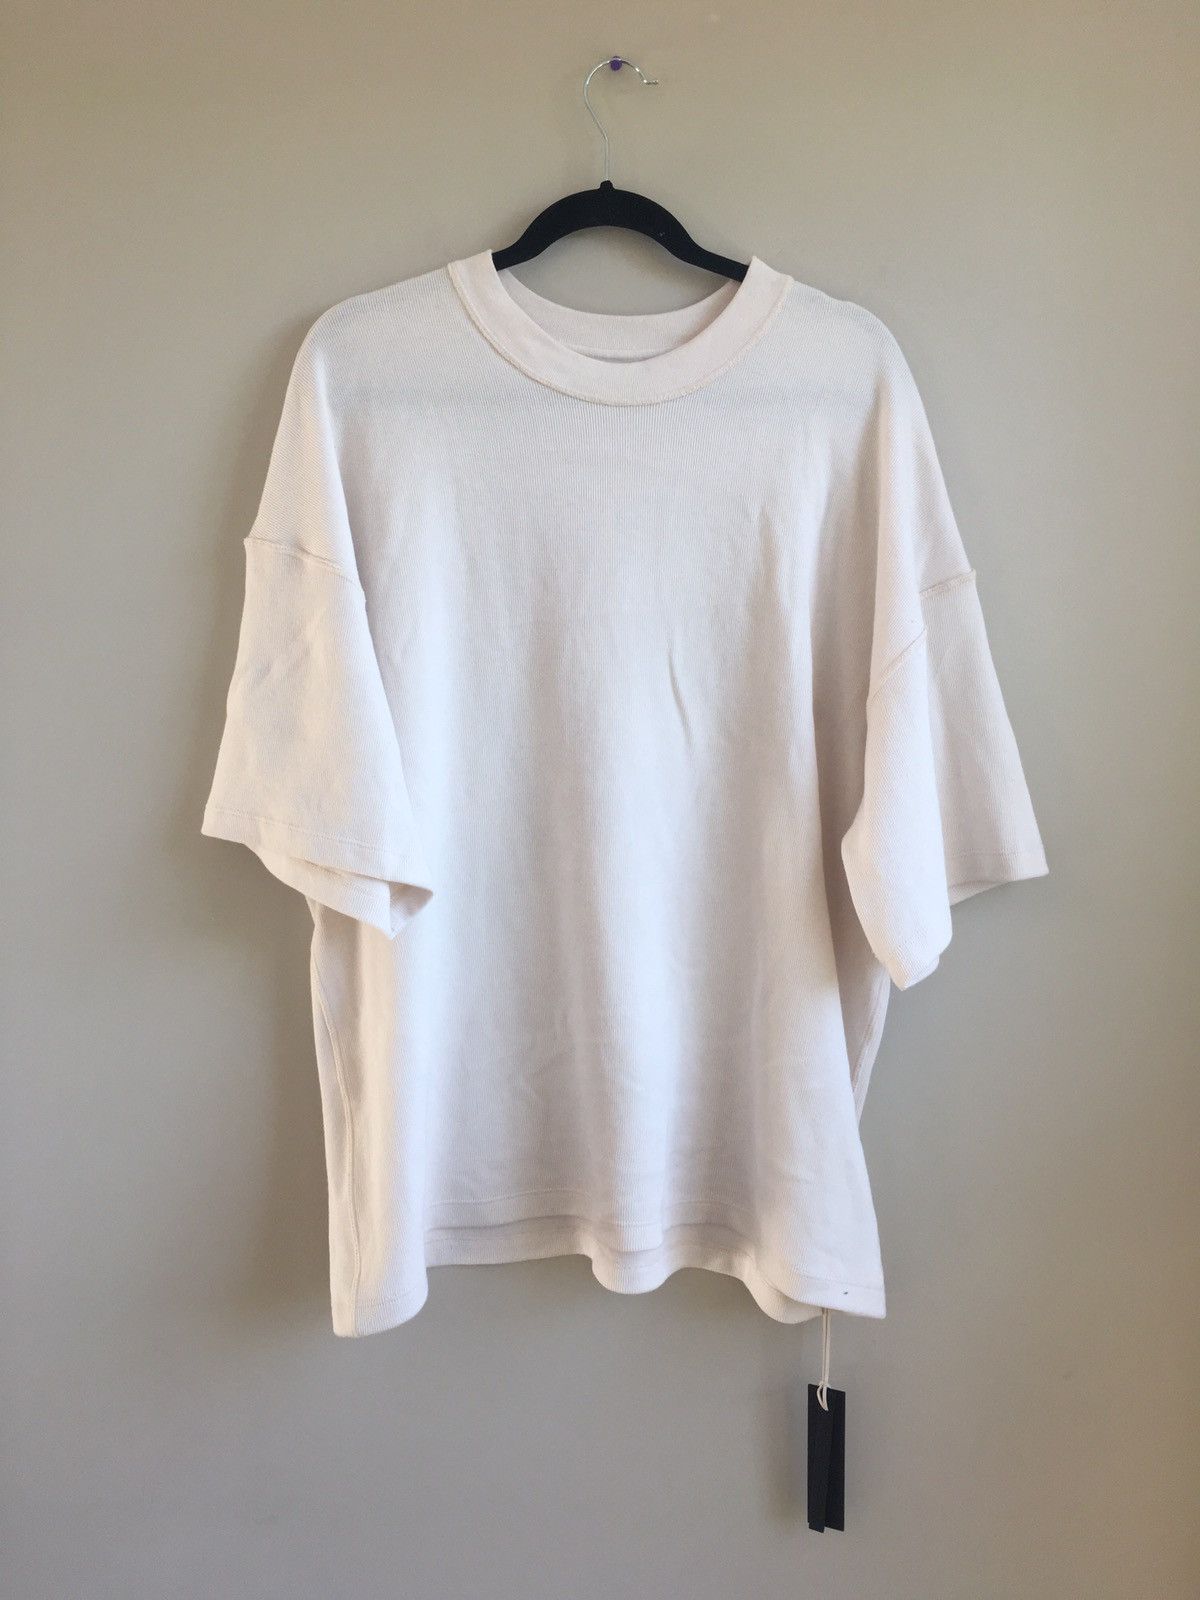 Fear of God Inside Out / Reversible Tee 5th Collection | Grailed